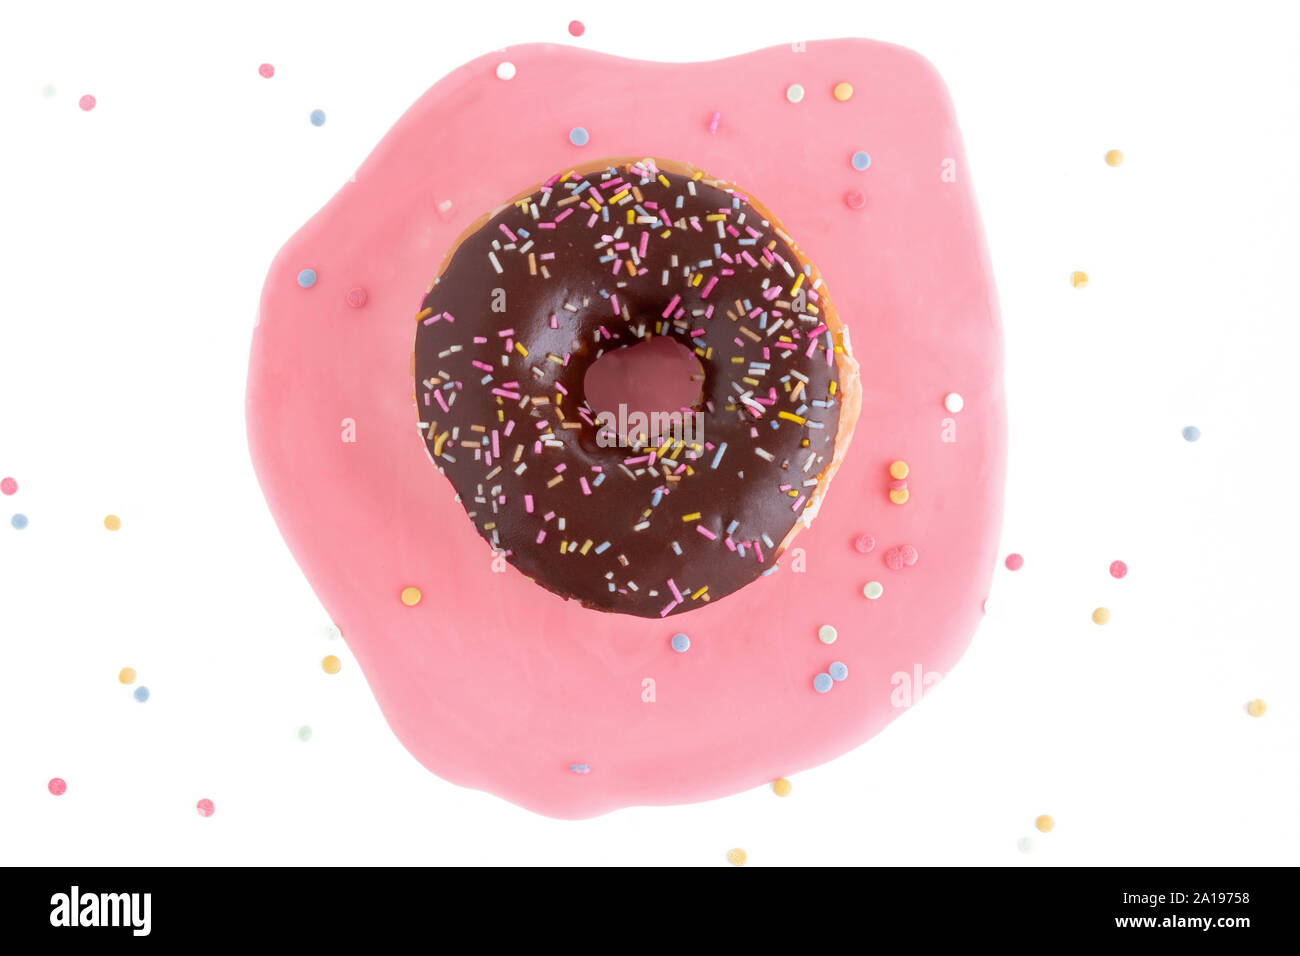 Top view, flat on a donut with chocolate coating and colorful sprinkles. Pink icing stain. Stock Photo